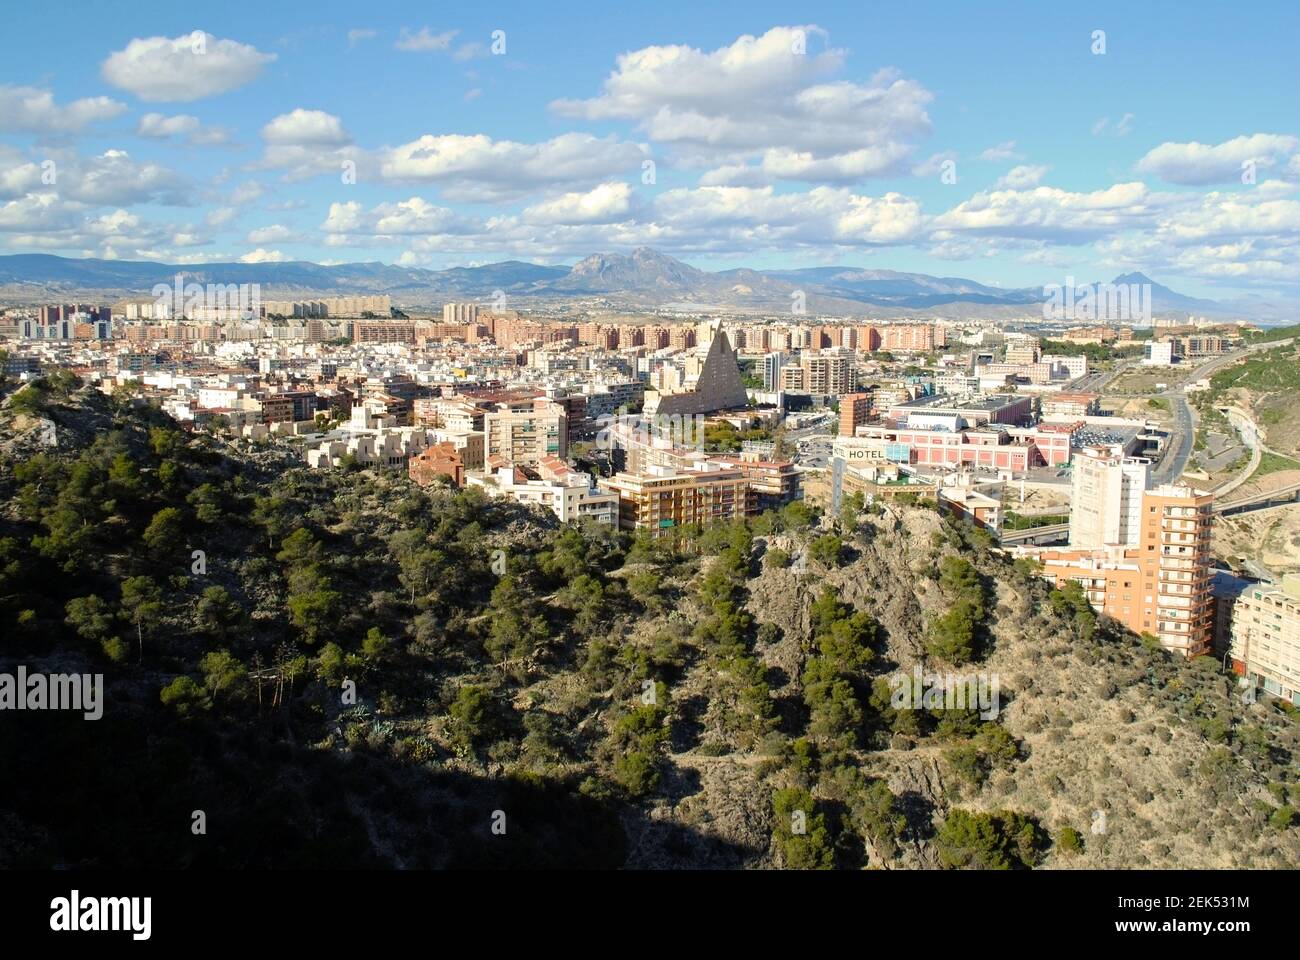 The outskirts of Alicante, Spain, with lots of tall blocks of flats. Stock Photo